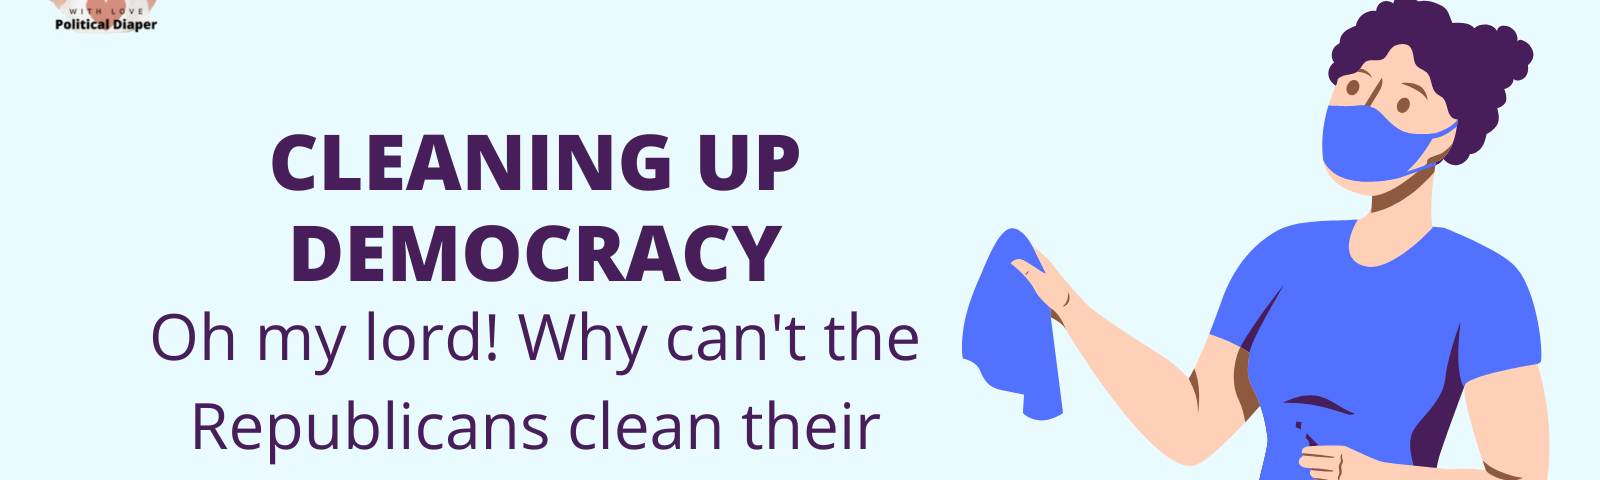 cleaning up democracy